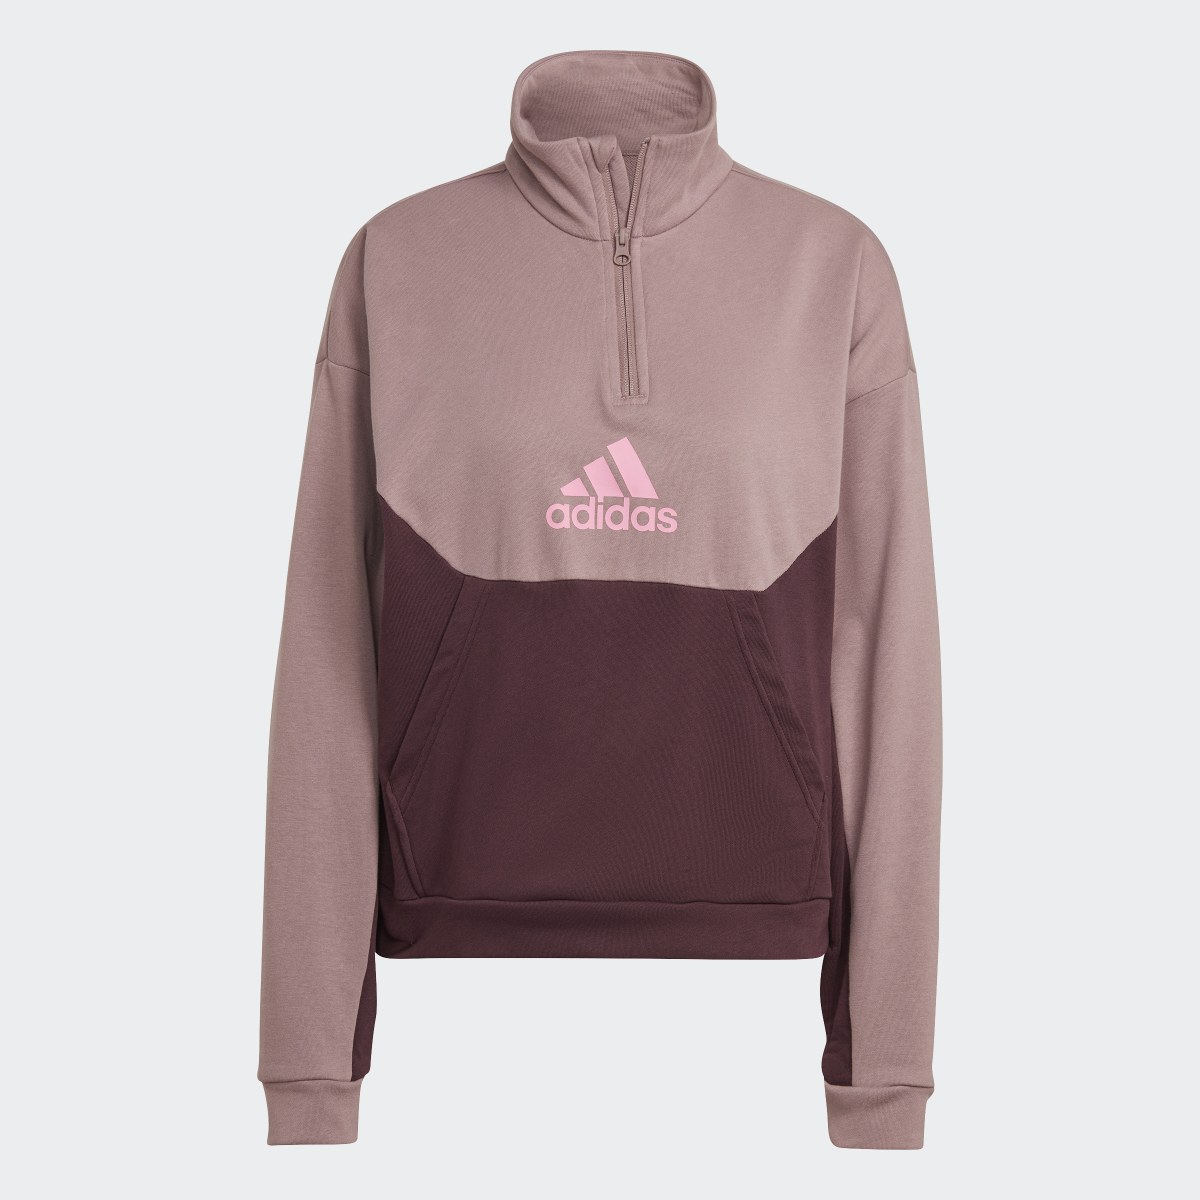 Adidas Half-Zip and Tights Track Suit. 5